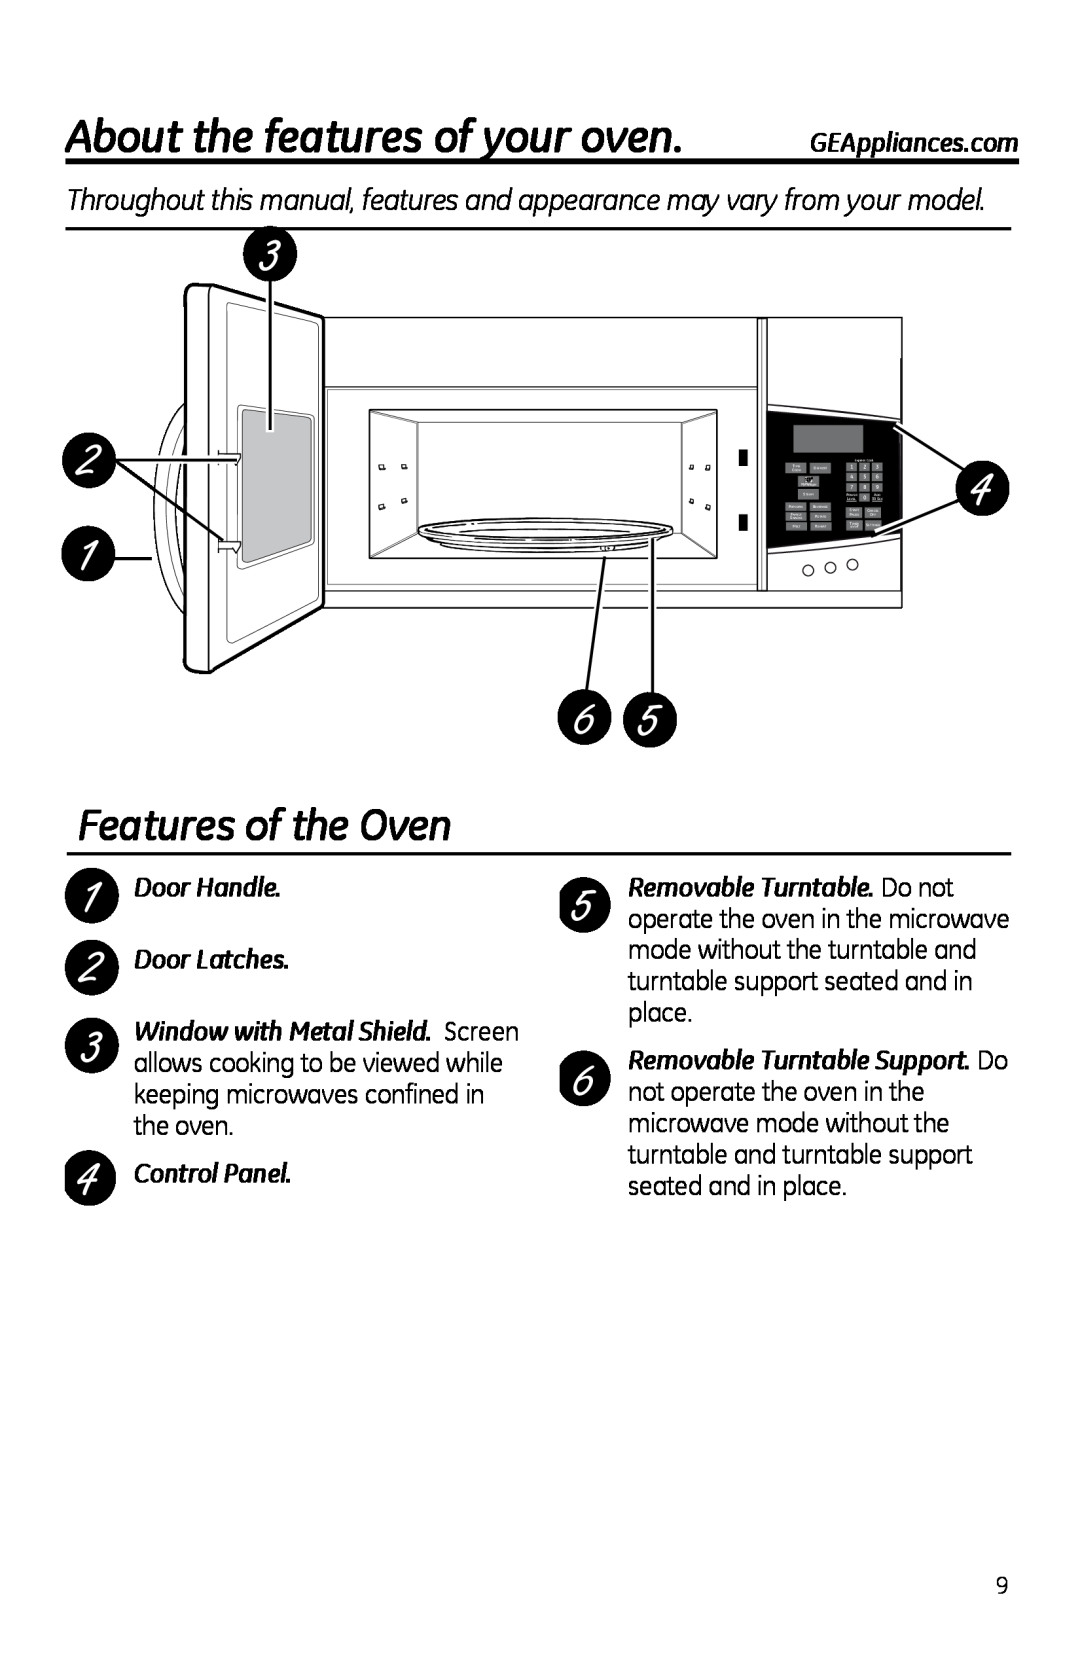 GE PVM1970 owner manual About the features of your oven, Features of the Oven, Door Handle Door Latches, Control Panel 